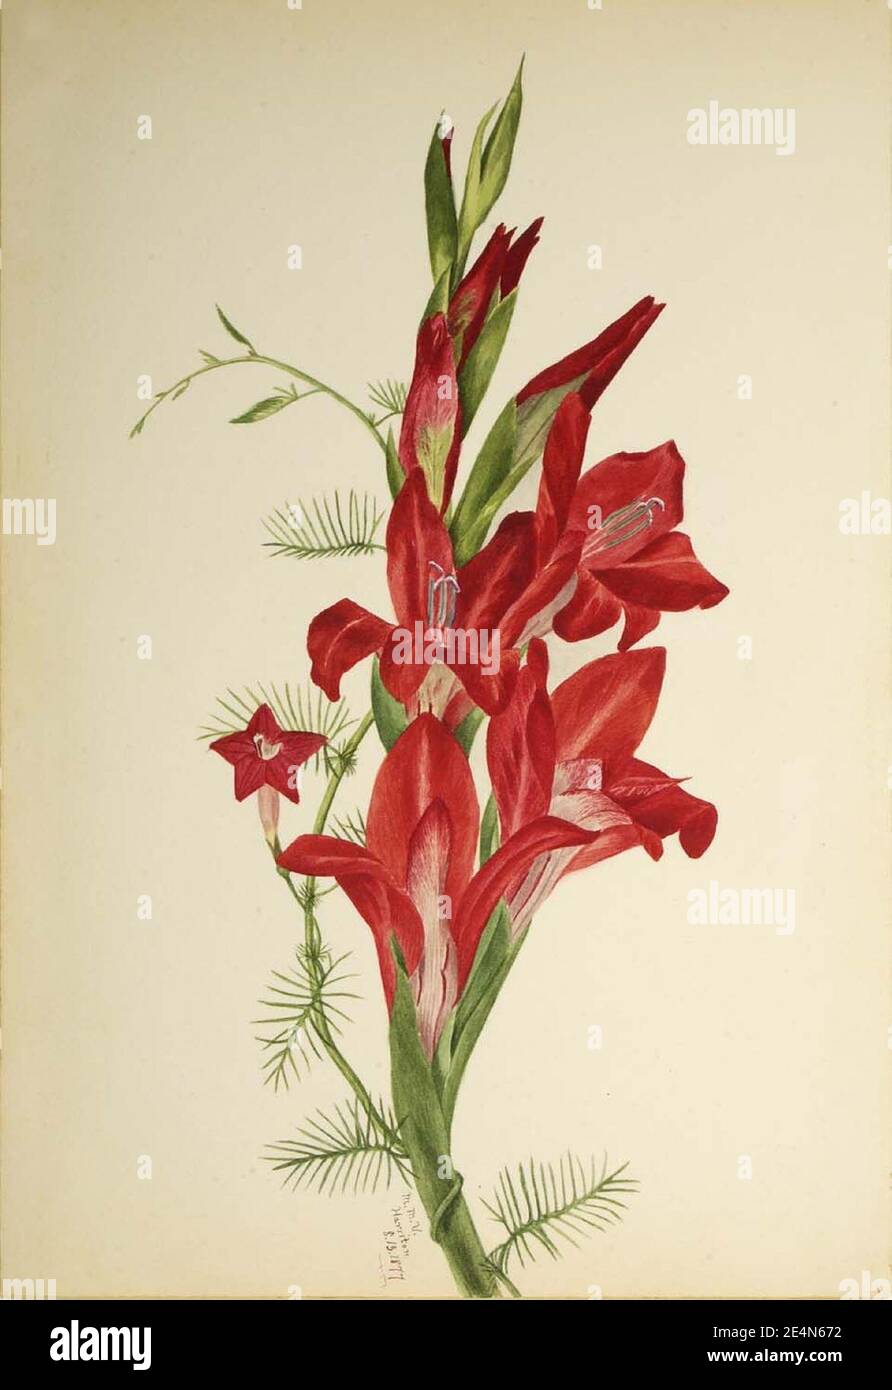 Mary Vaux Walcott - Cannas and Cypress Vine (Canna species and Ipomoea quamoclit) Stock Photo